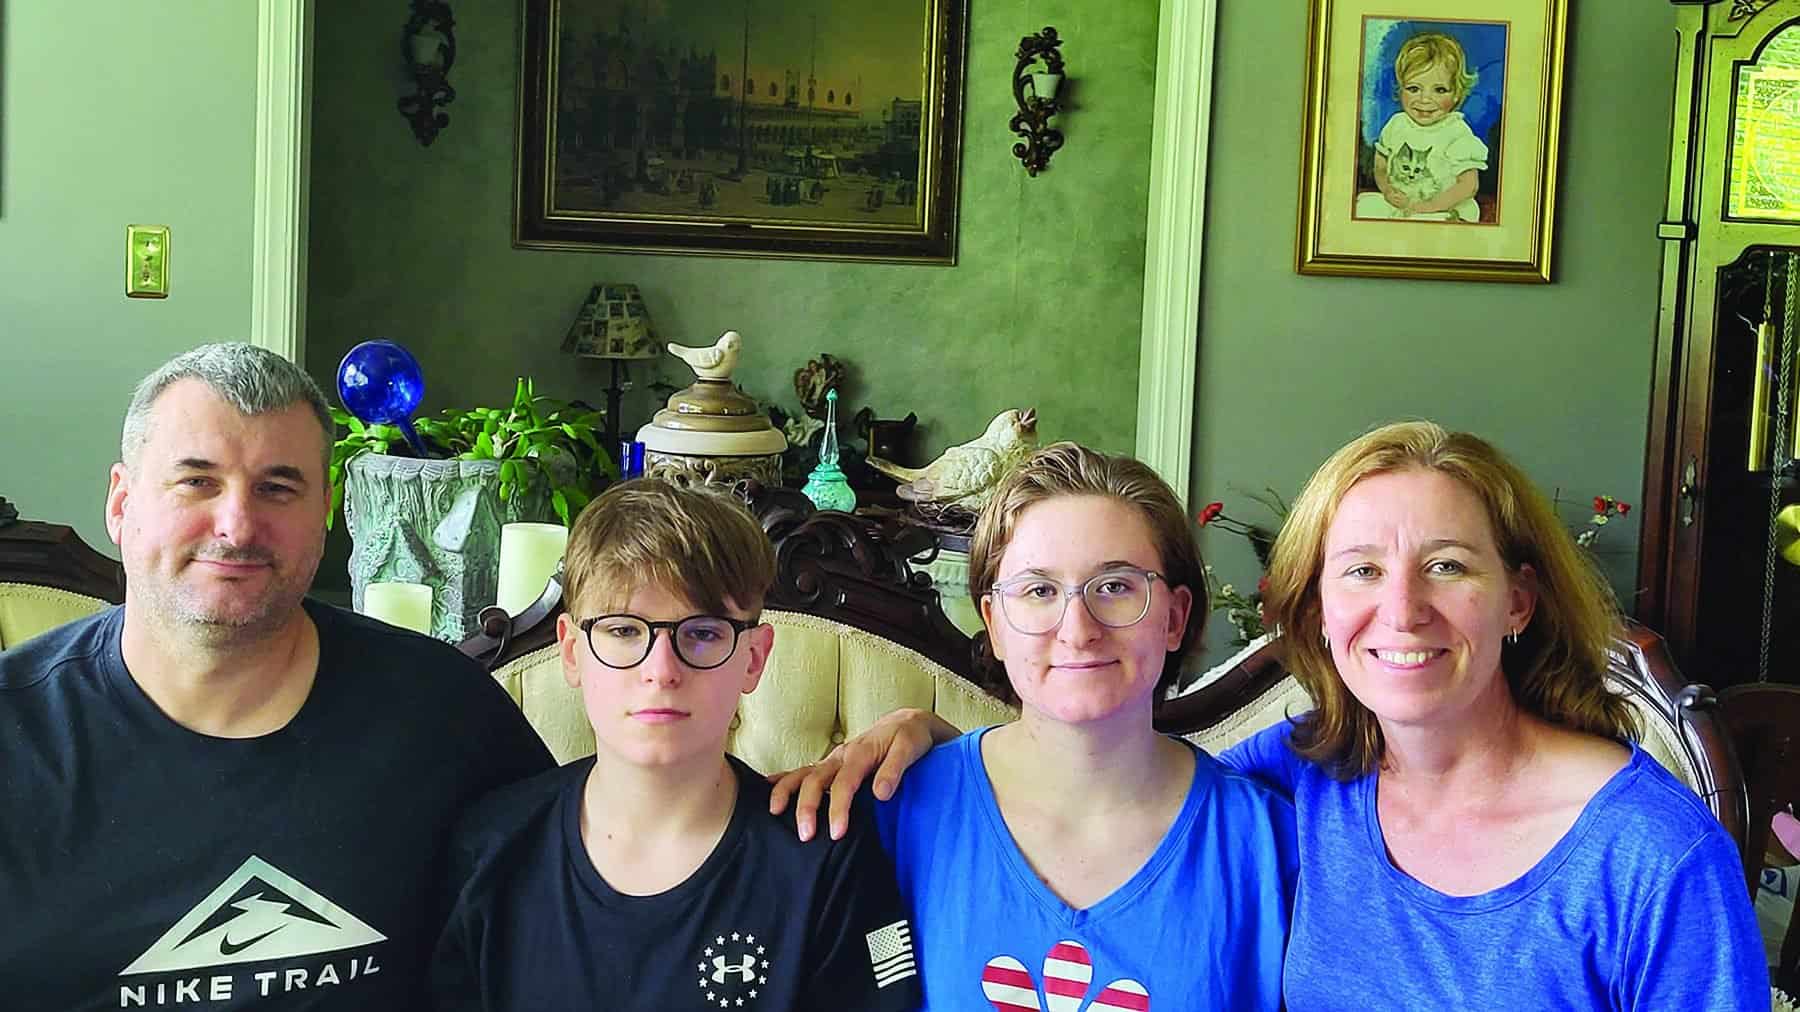 Oleg and Lori Enskyy and their teenage children, Abigail and Simon, are a missionary family based in Mukachevo, Ukraine.